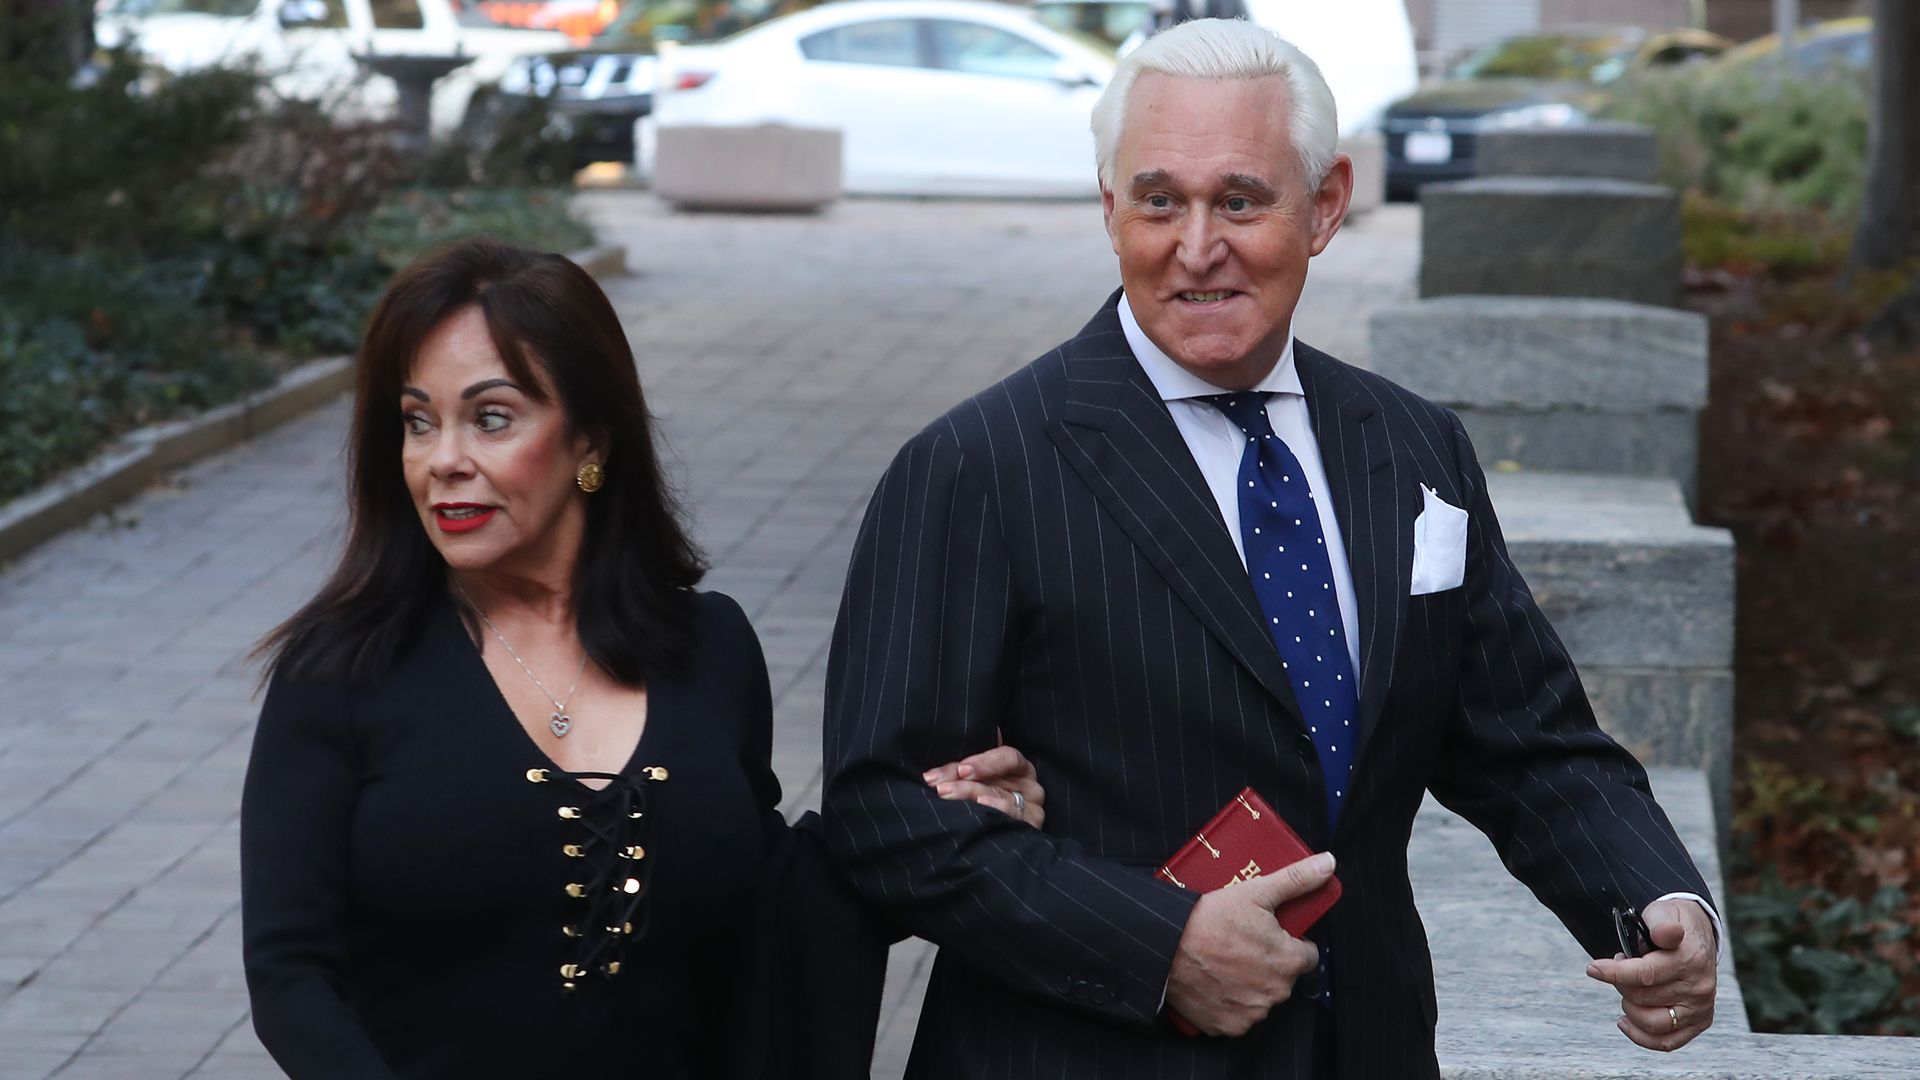 Roger stone walks into the courtroom with his wife.